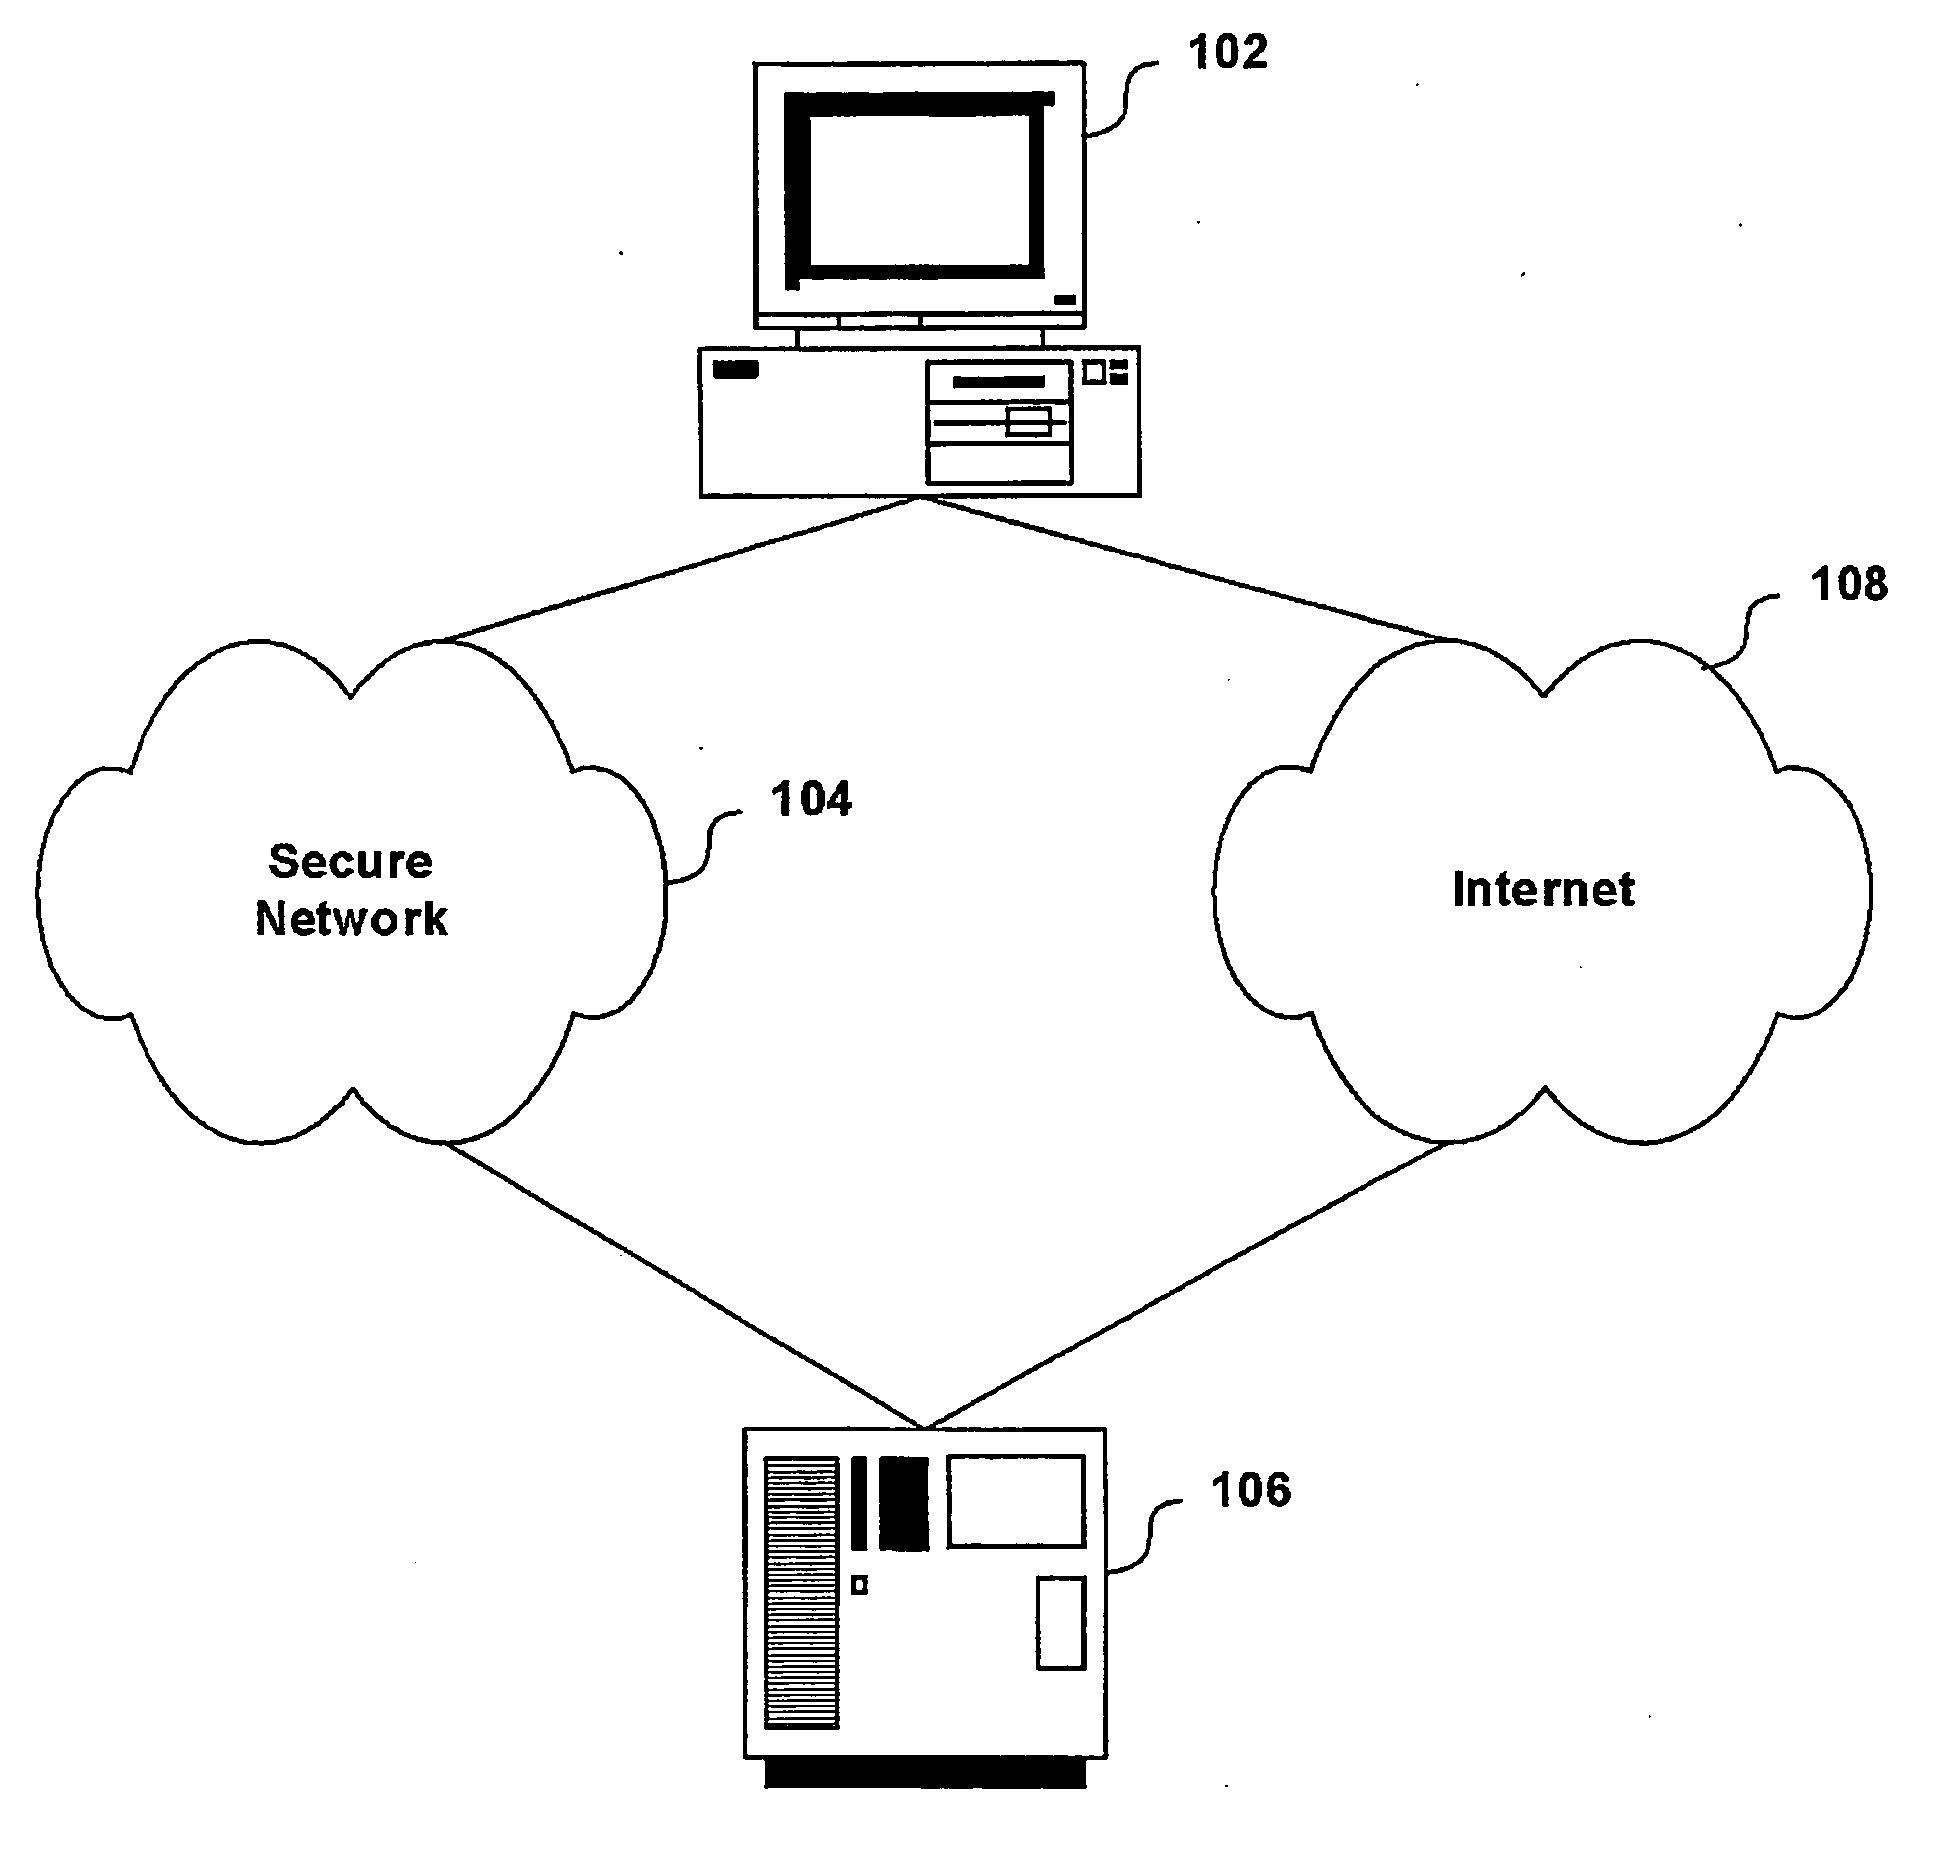 Packet filtering in a NIC to control antidote loading